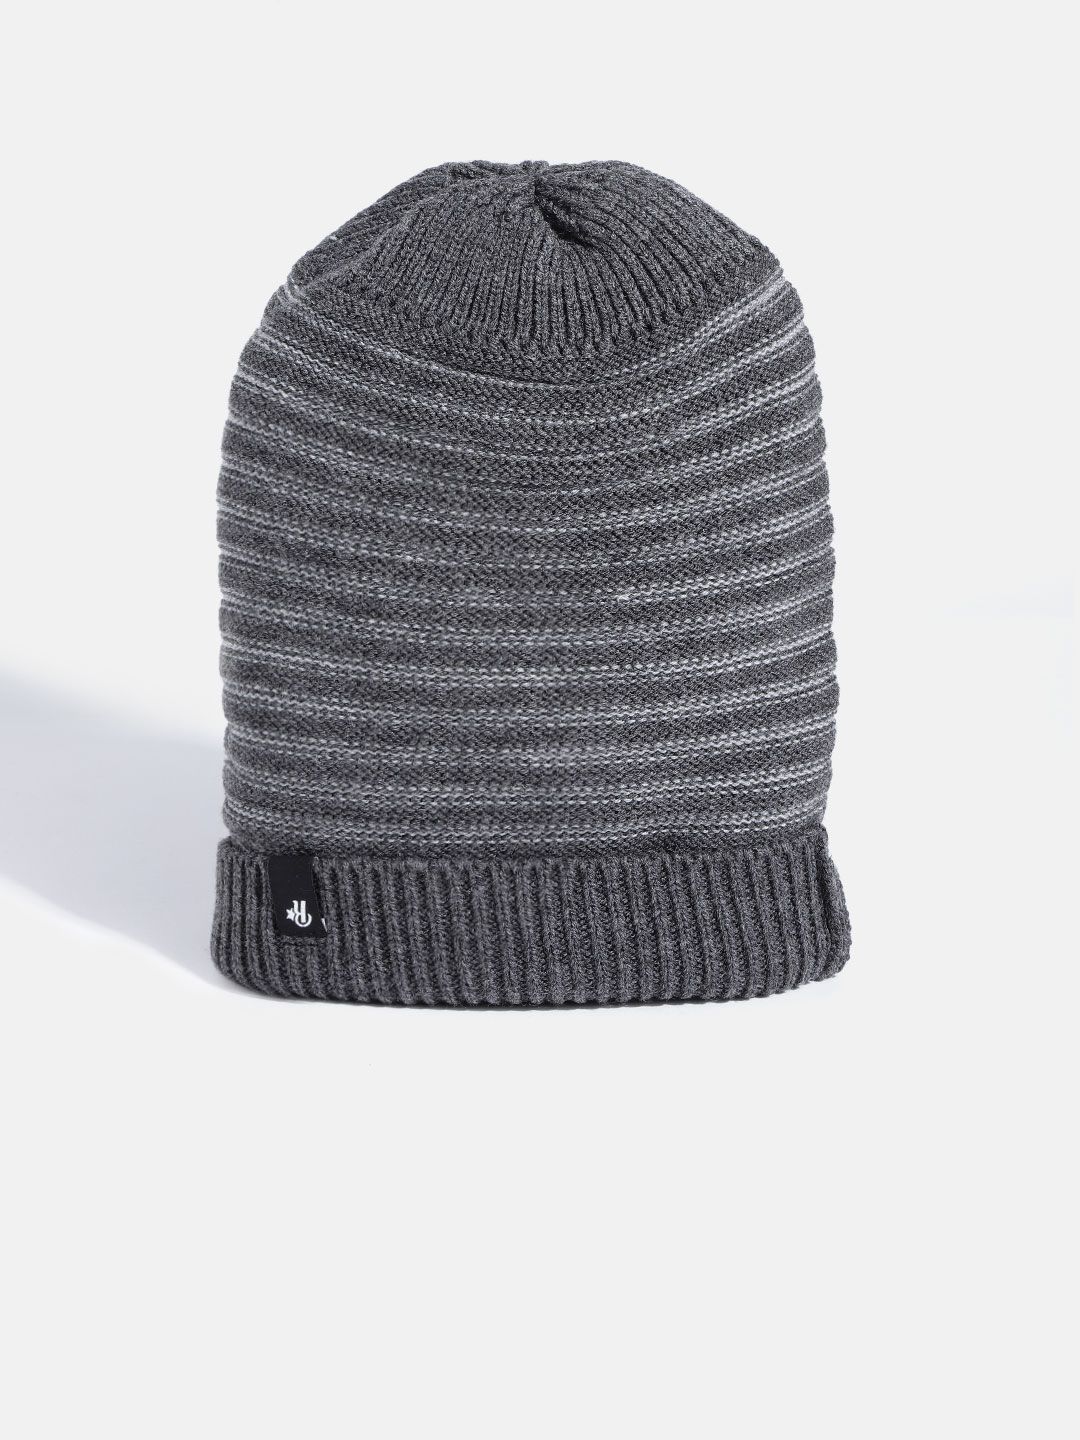 The Roadster Lifestyle Co Unisex Grey Striped Beanie Price in India